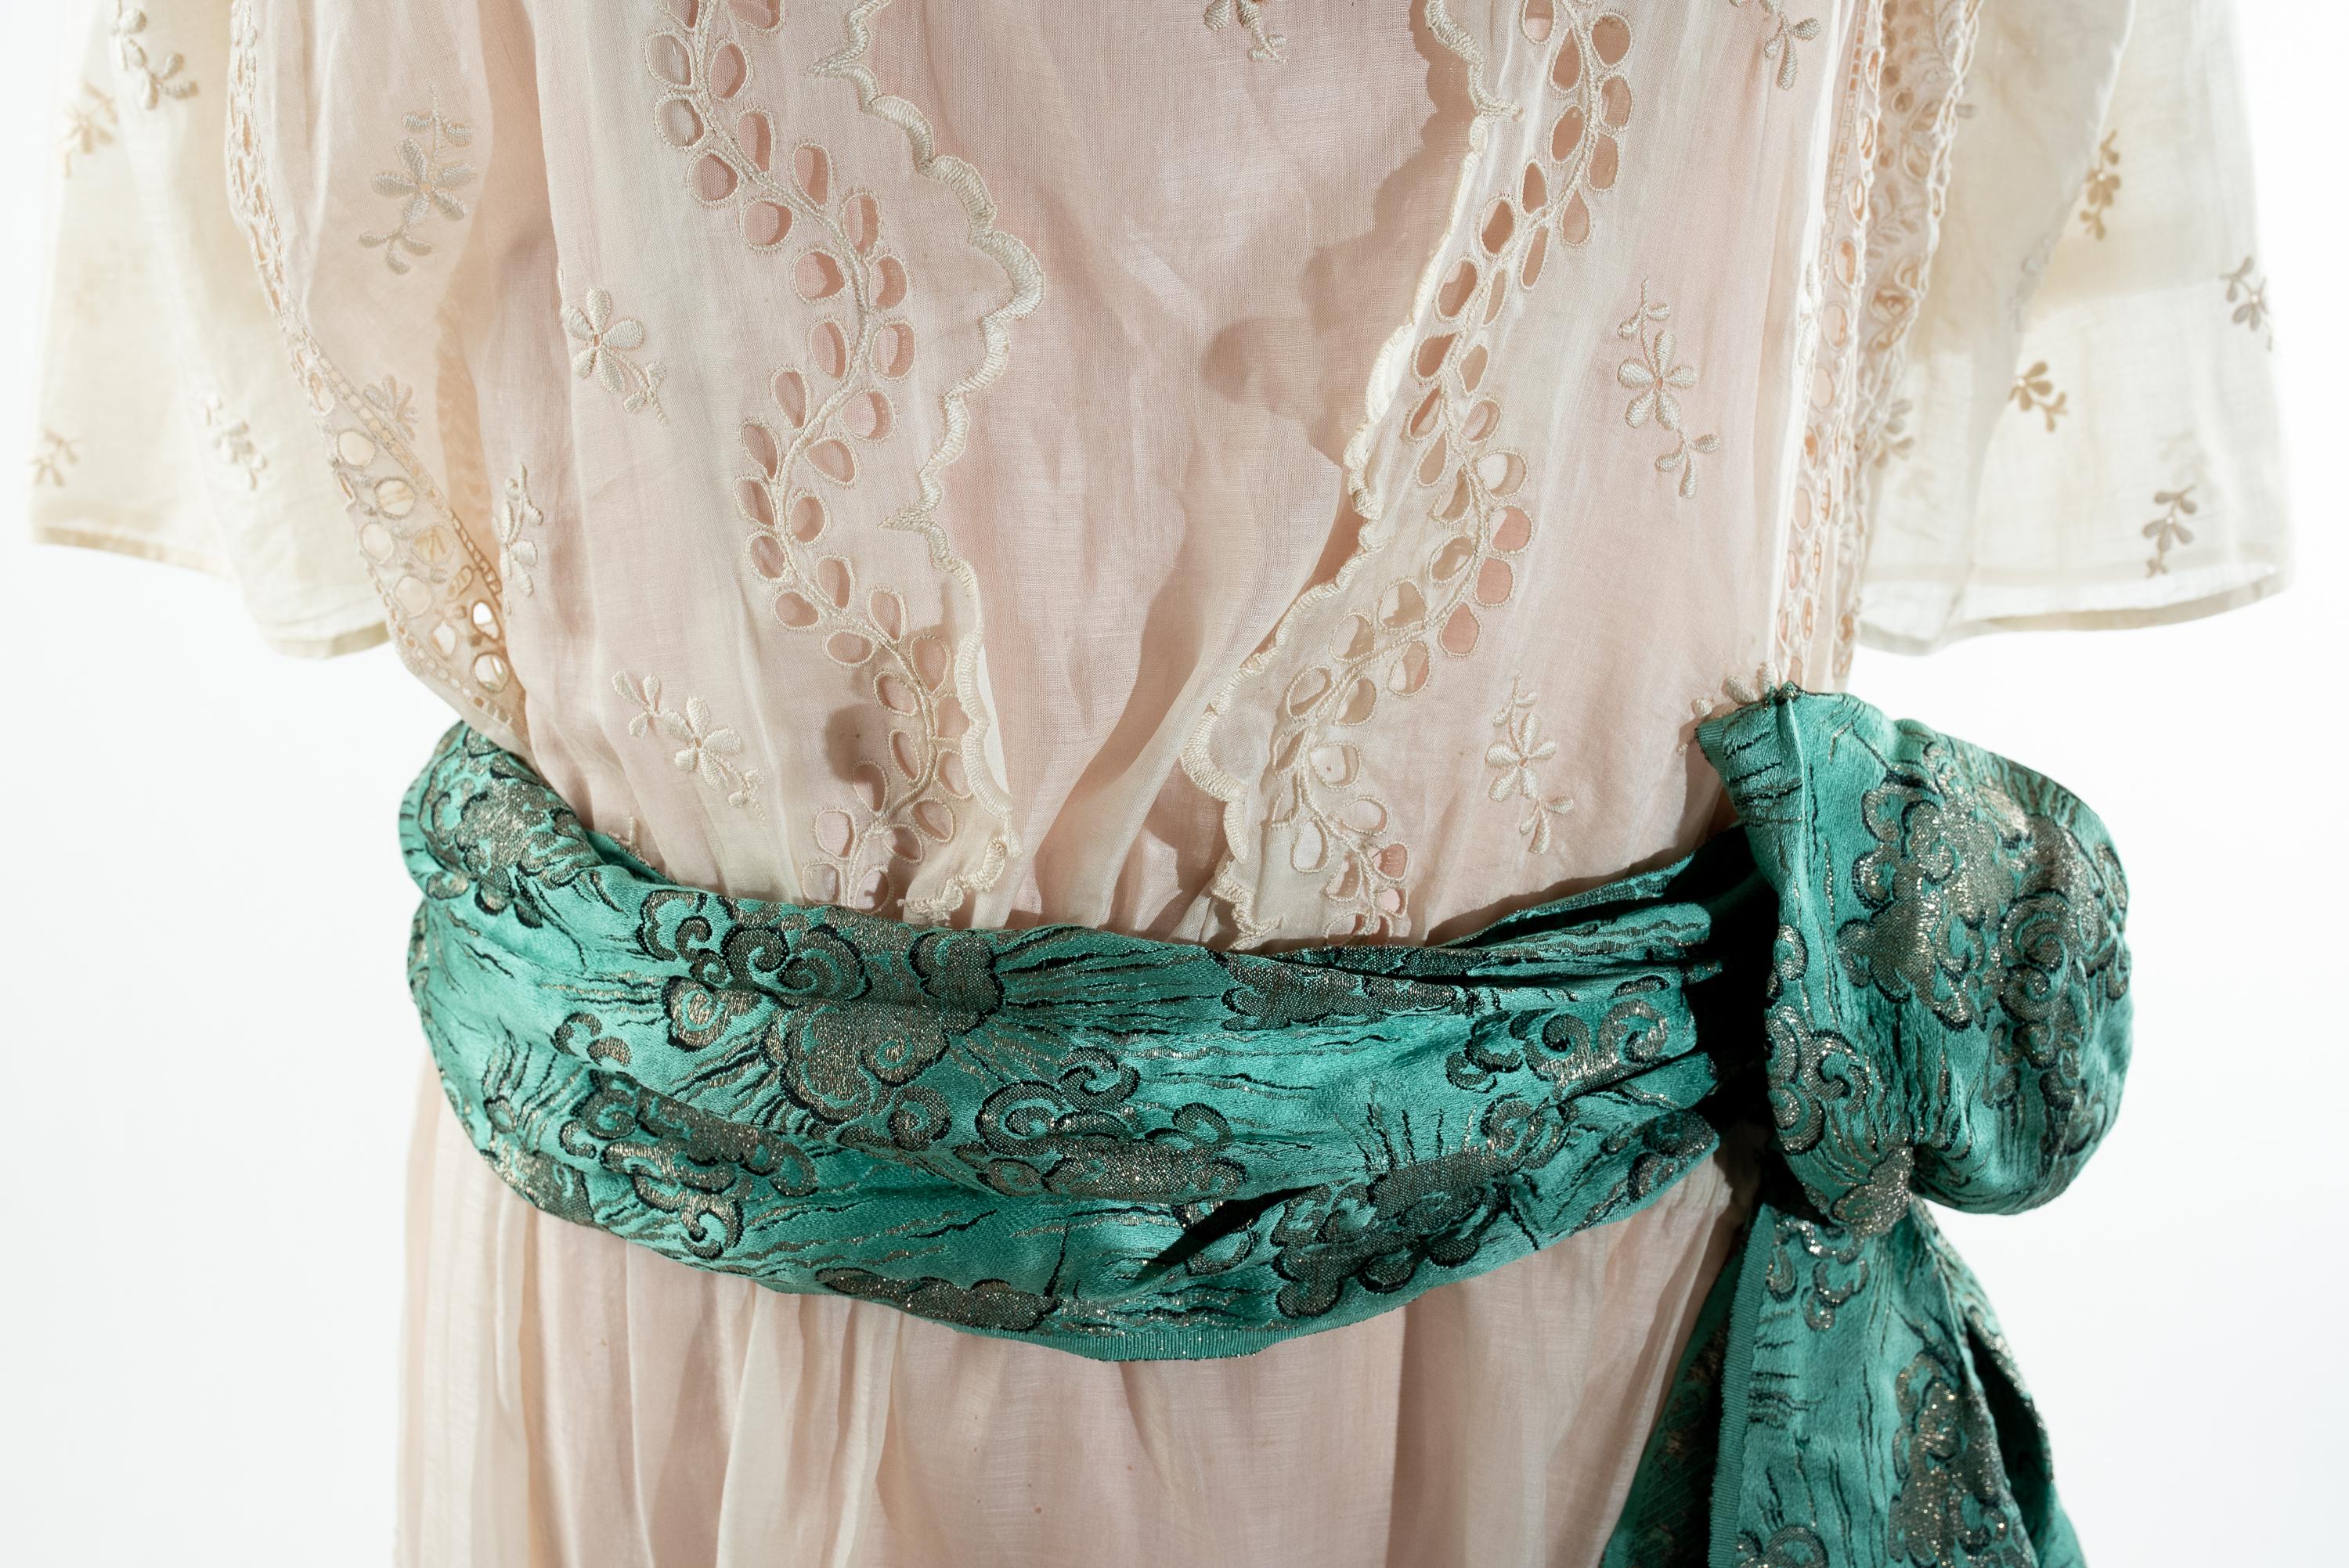 A silk pongee & White Embroidery Chiffon Summer Dress - France Circa 1920 For Sale 7